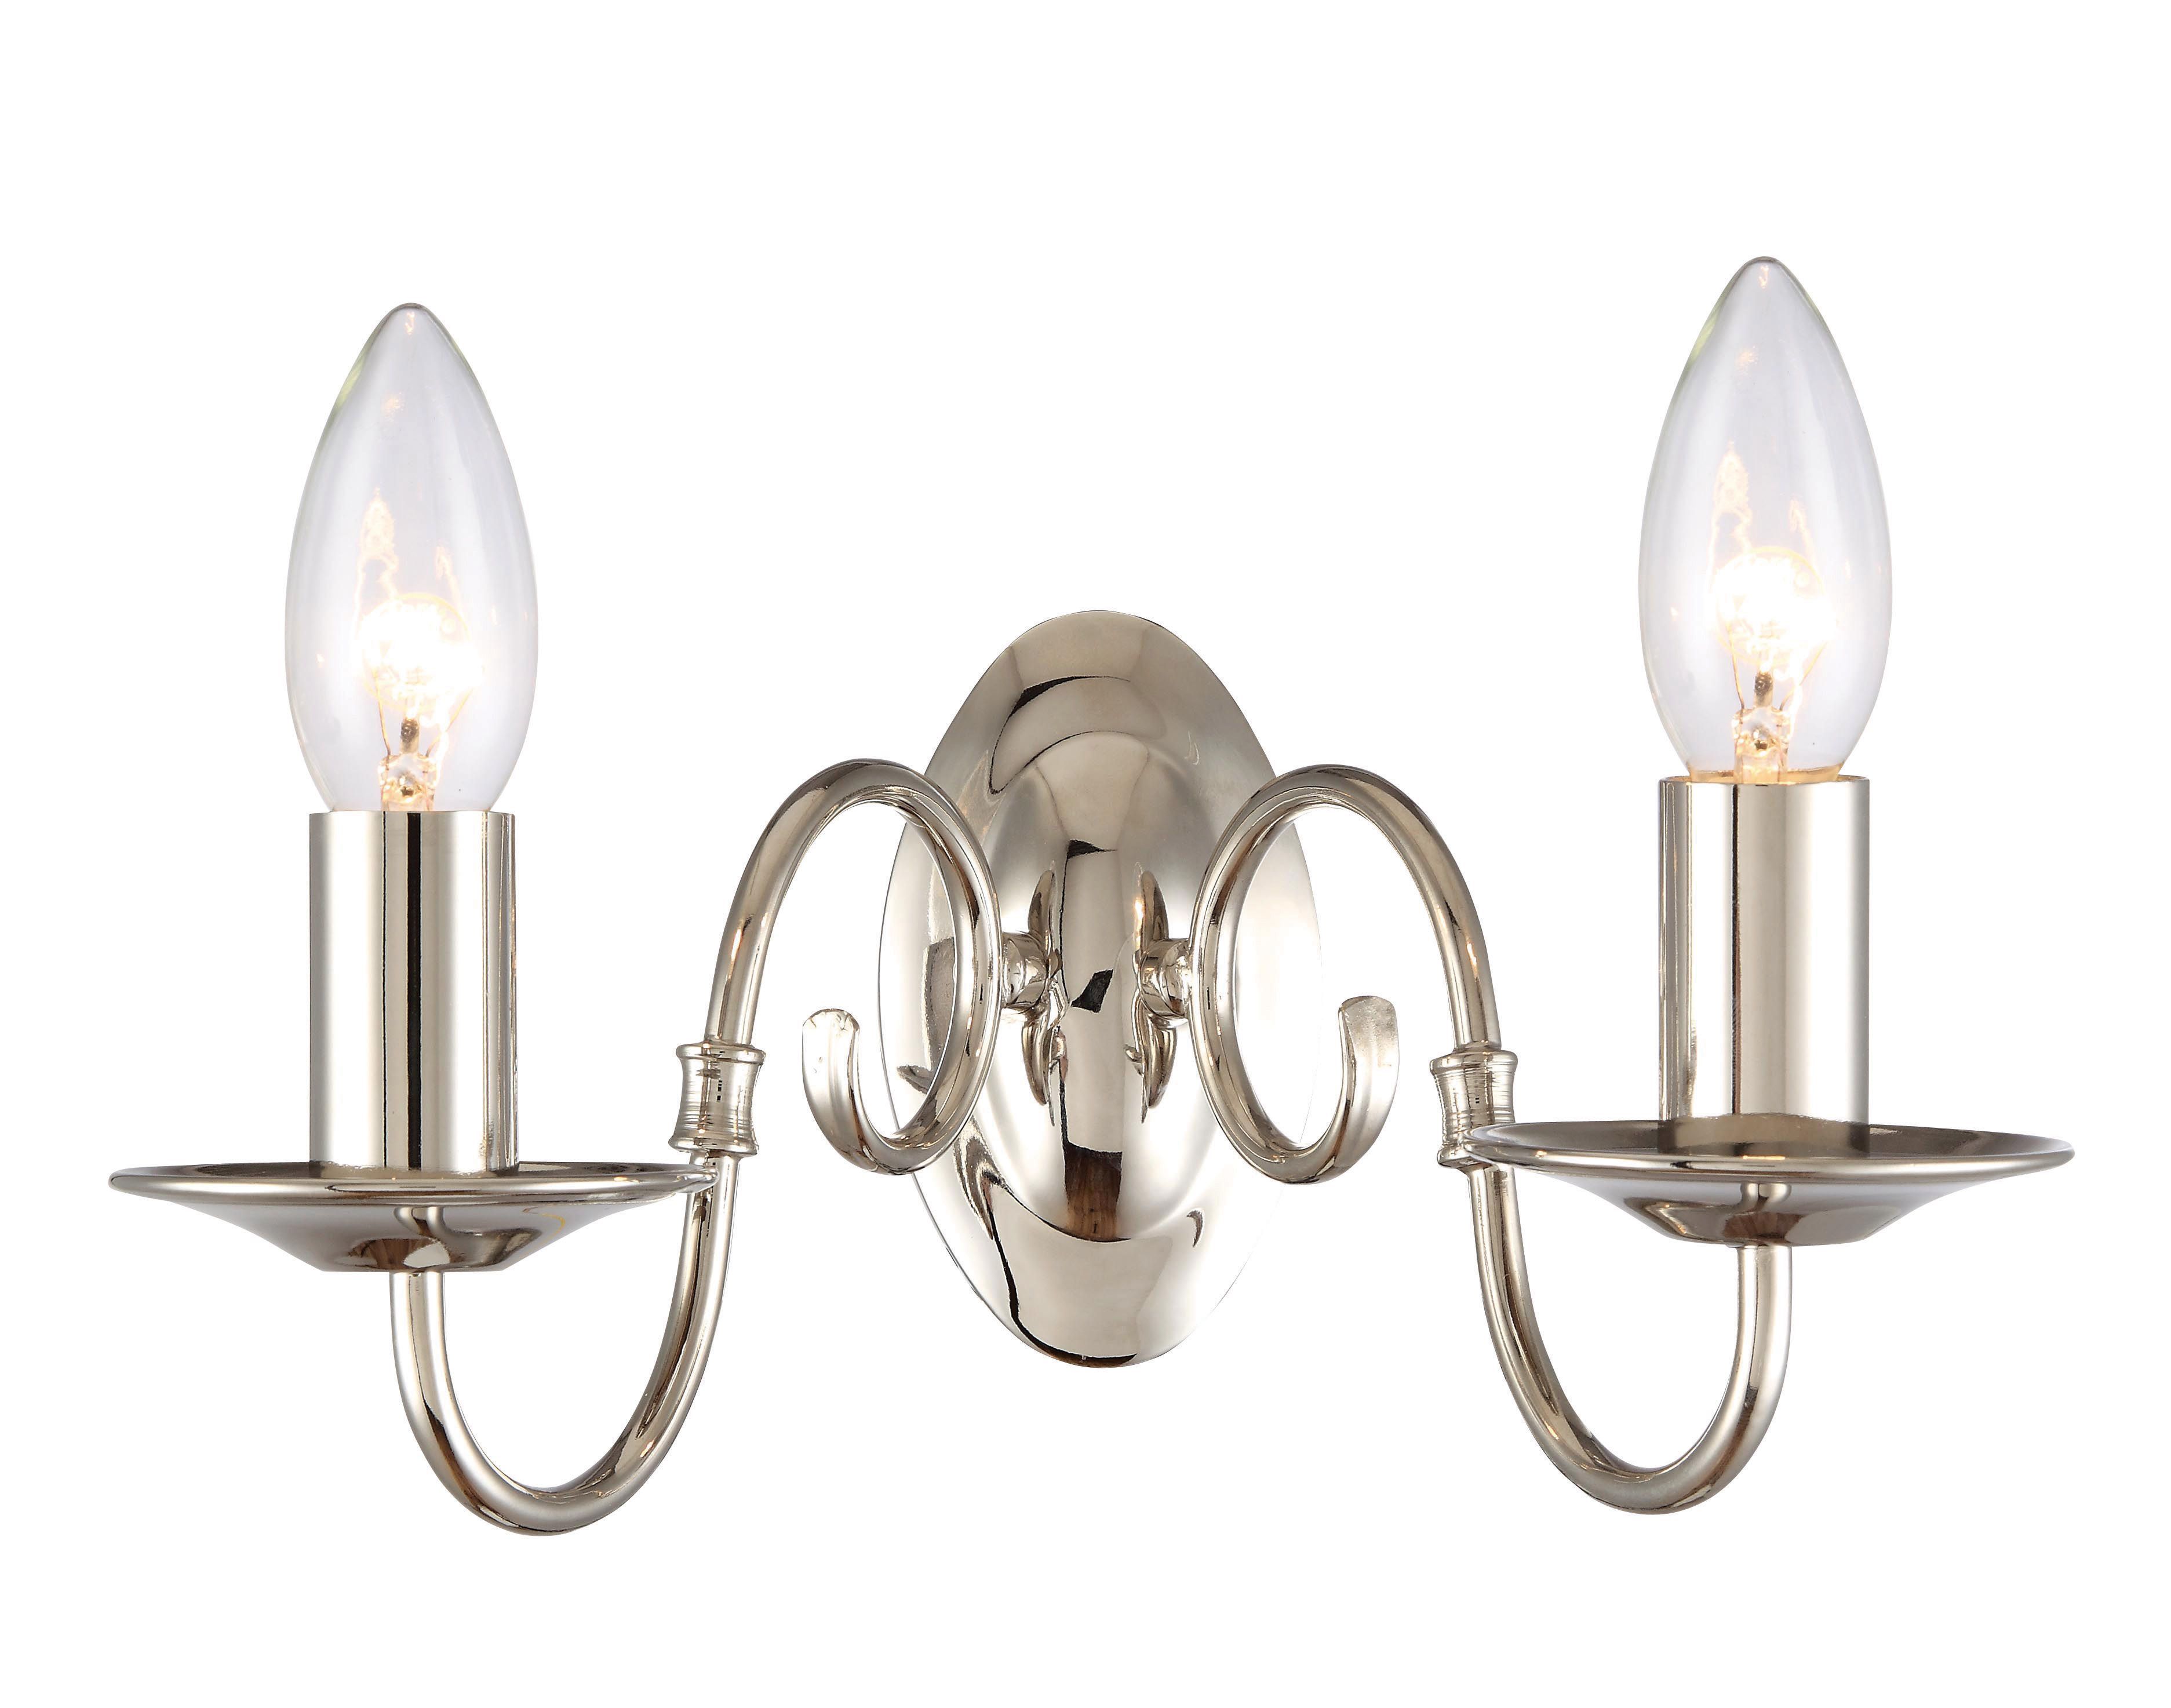 Manning Polished Nickel effect Double Wall light